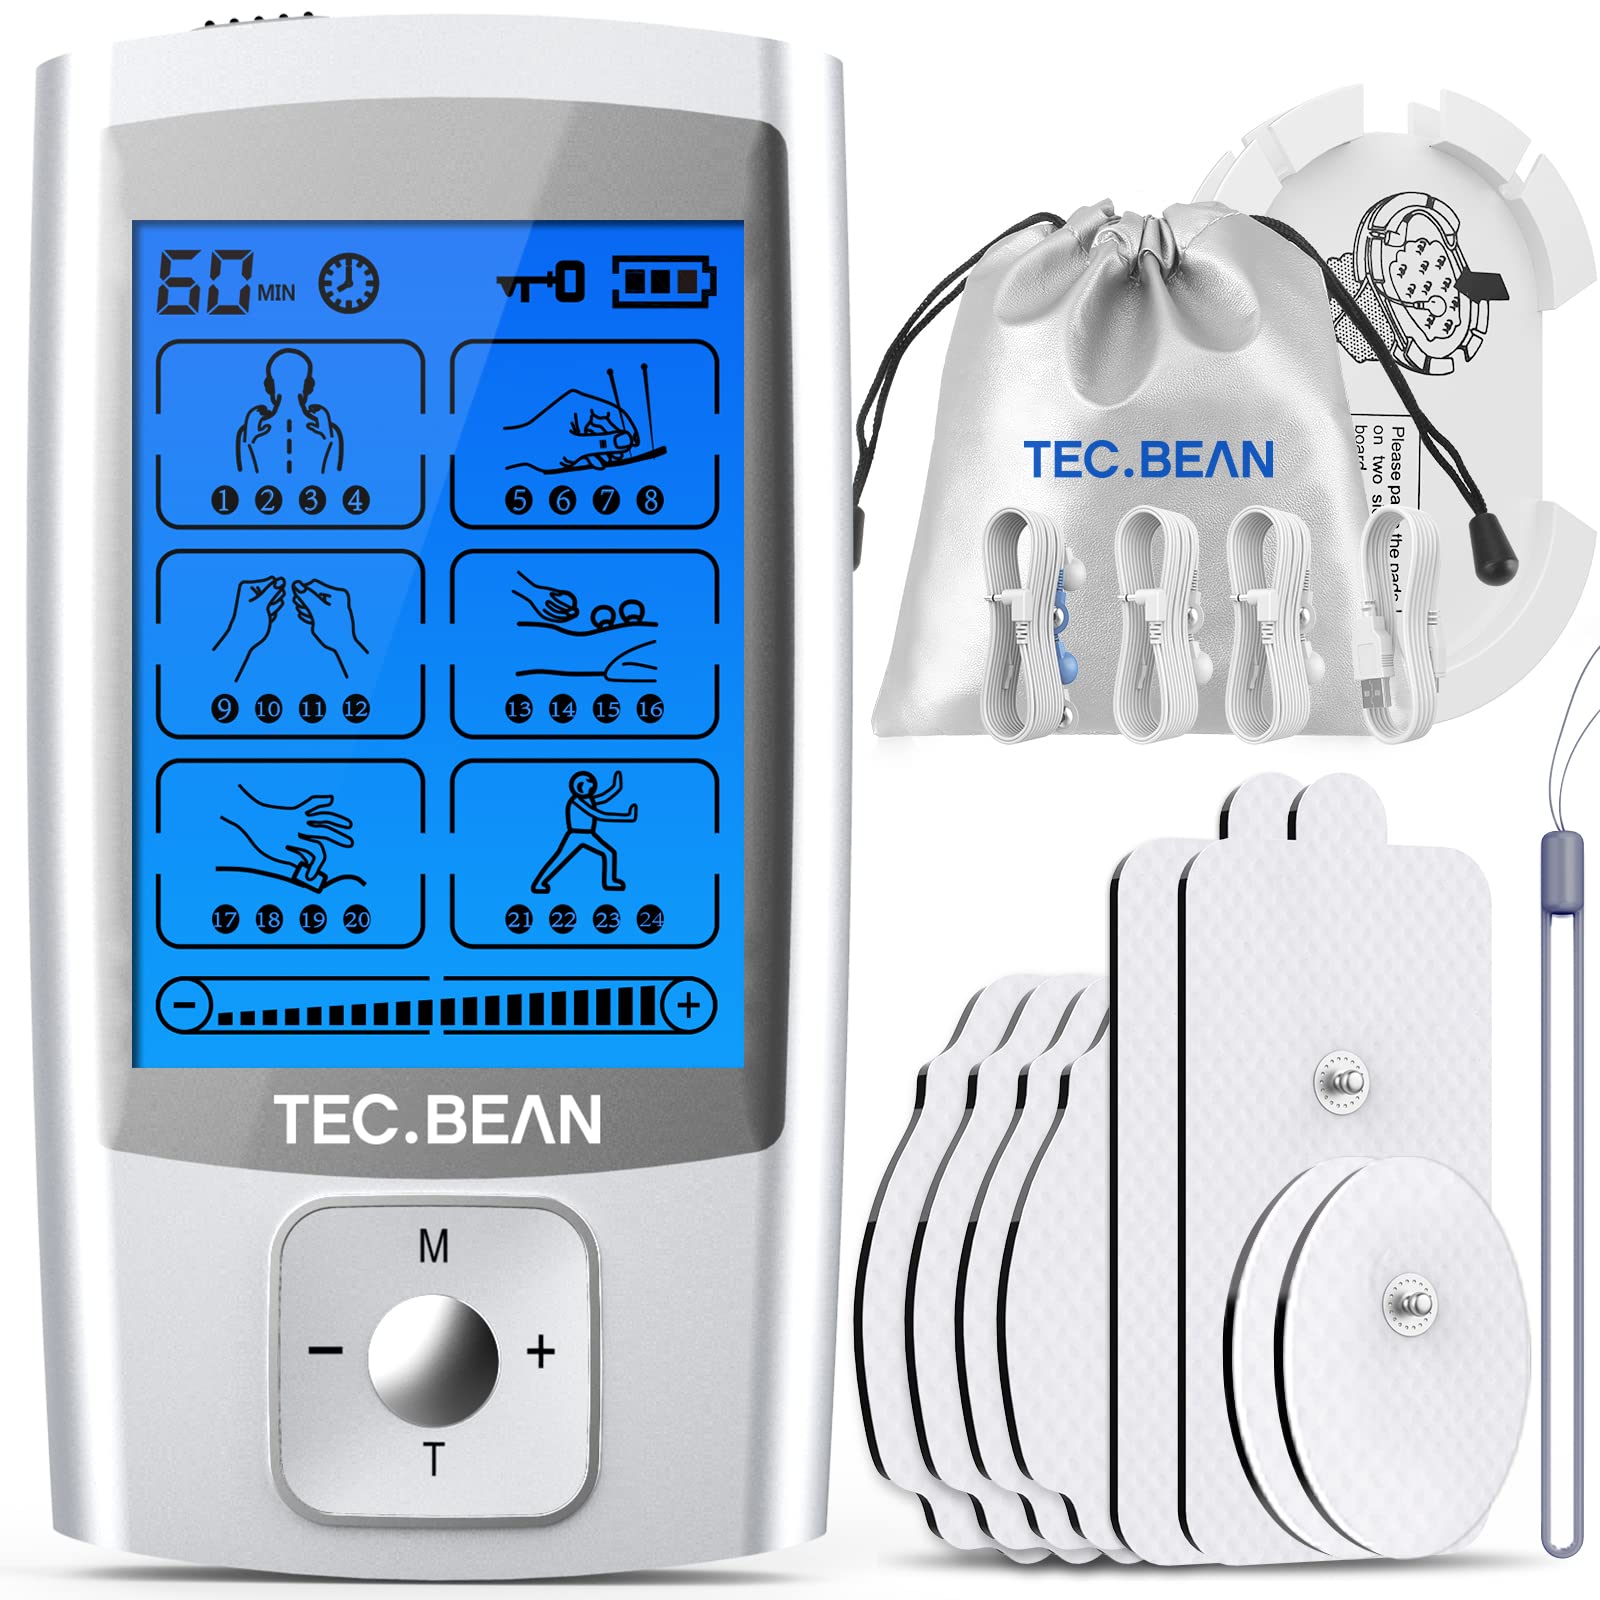 TEC.Bean Tens Unit for Pain Management and Rehabilitation with 24 Modes and 8 Pads Pulse Impulse Massager Great for Treating Pain and Muscle Relief